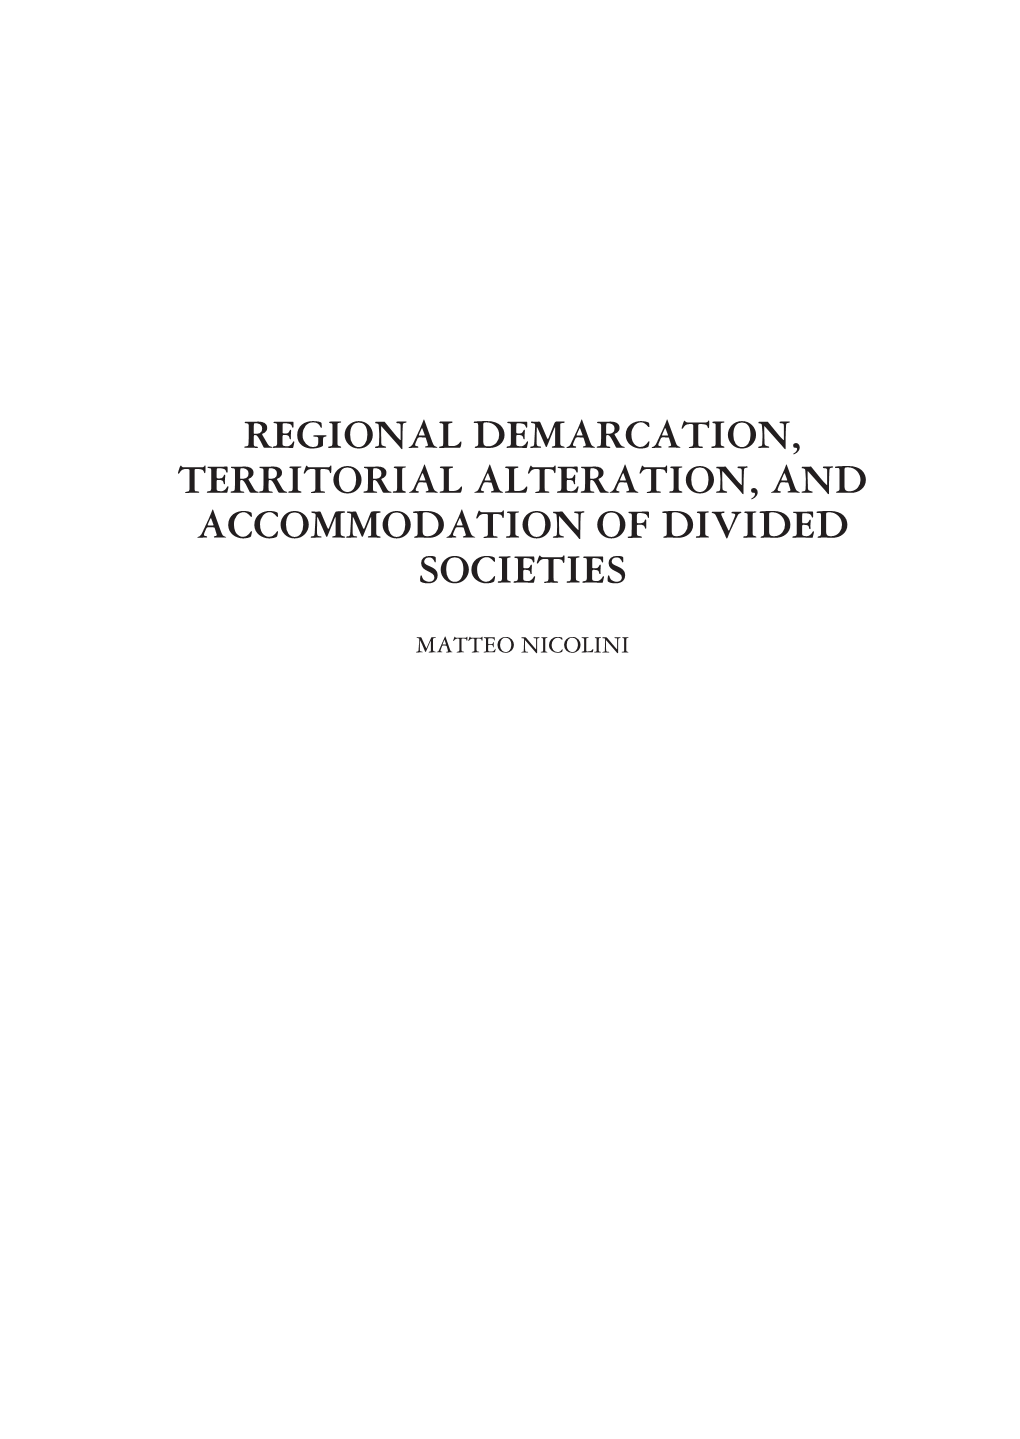 Regional Demarcation, Territorial Alteration, and Accommodation of Divided Societies